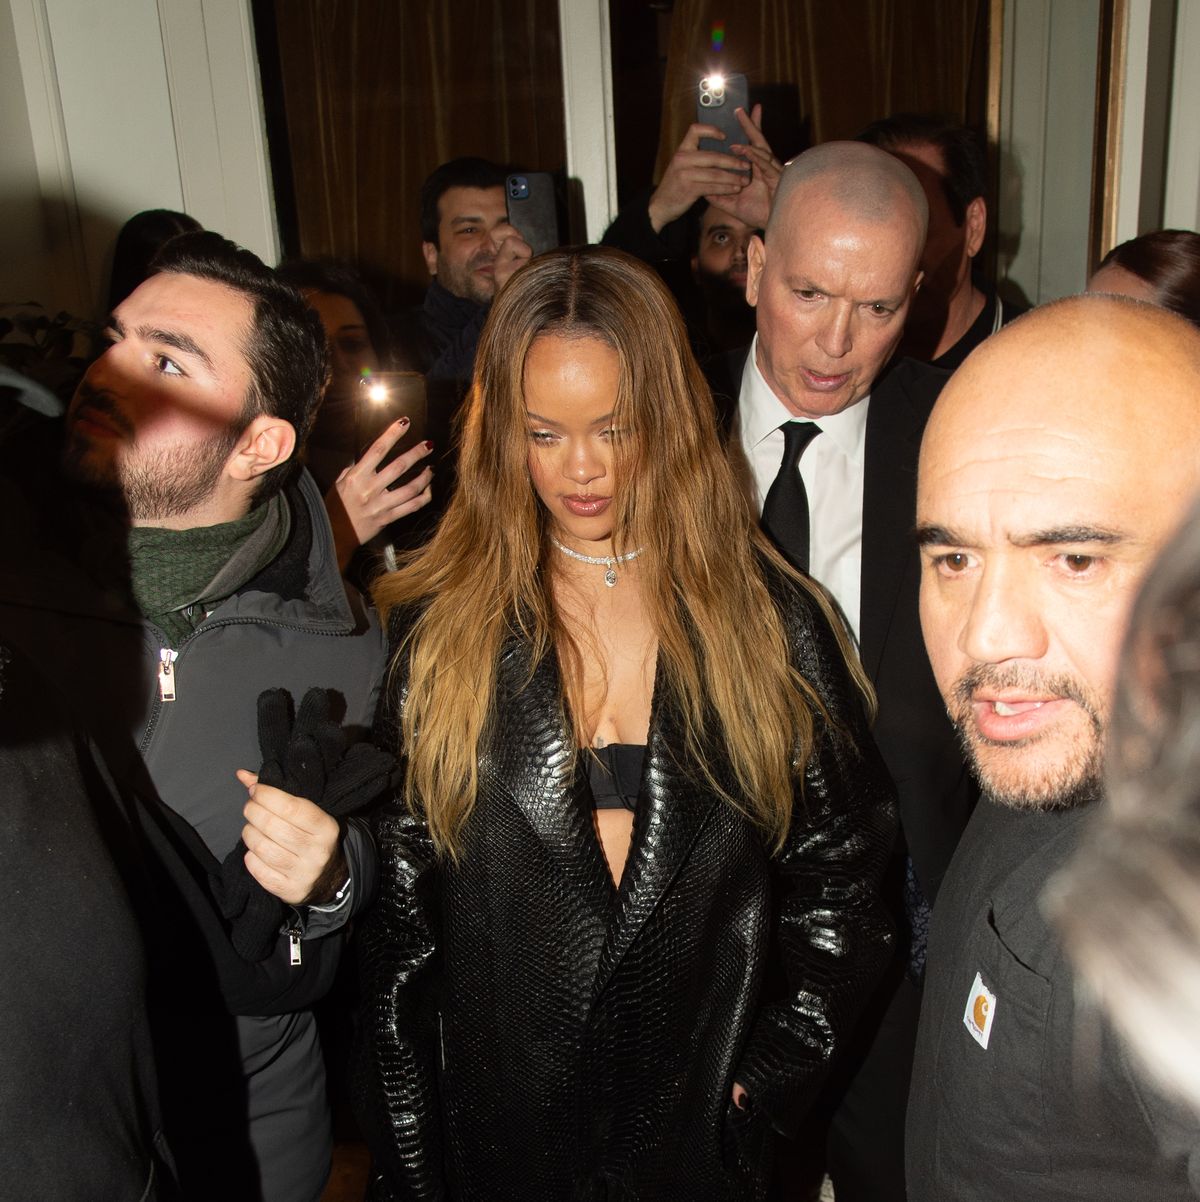 Rihanna Made This Pair of Men's Overalls Look Sexy